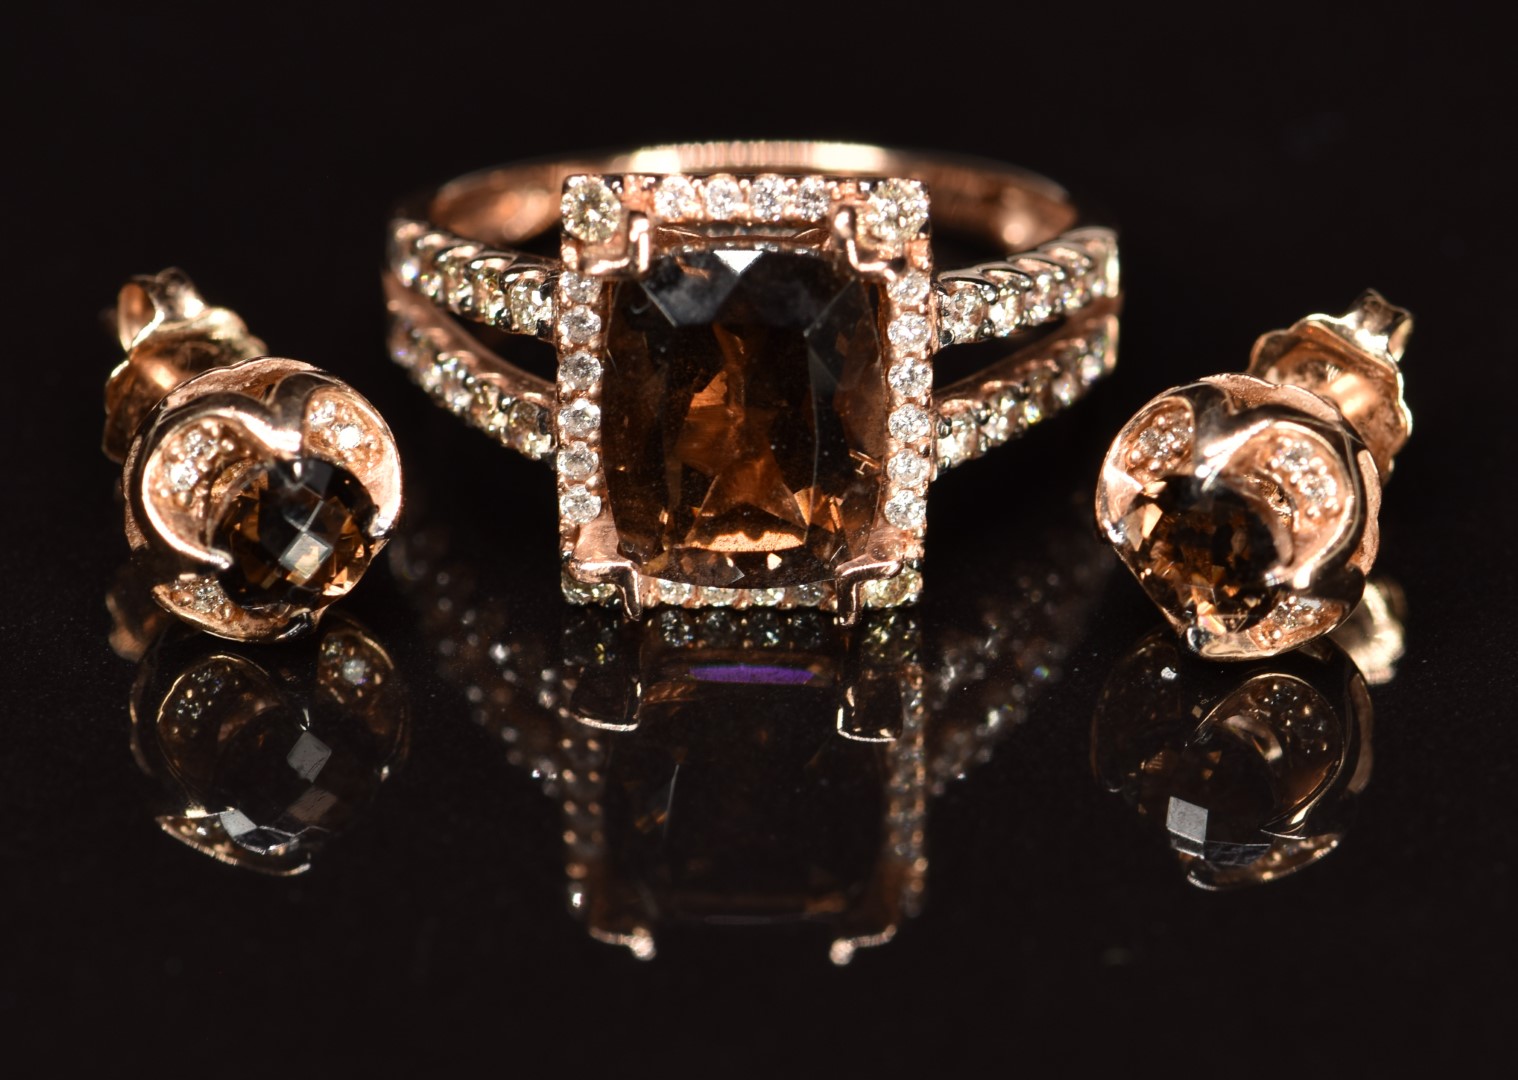 A 14k rose gold ring set with smoky quartz and diamonds, with matching earrings, 7g